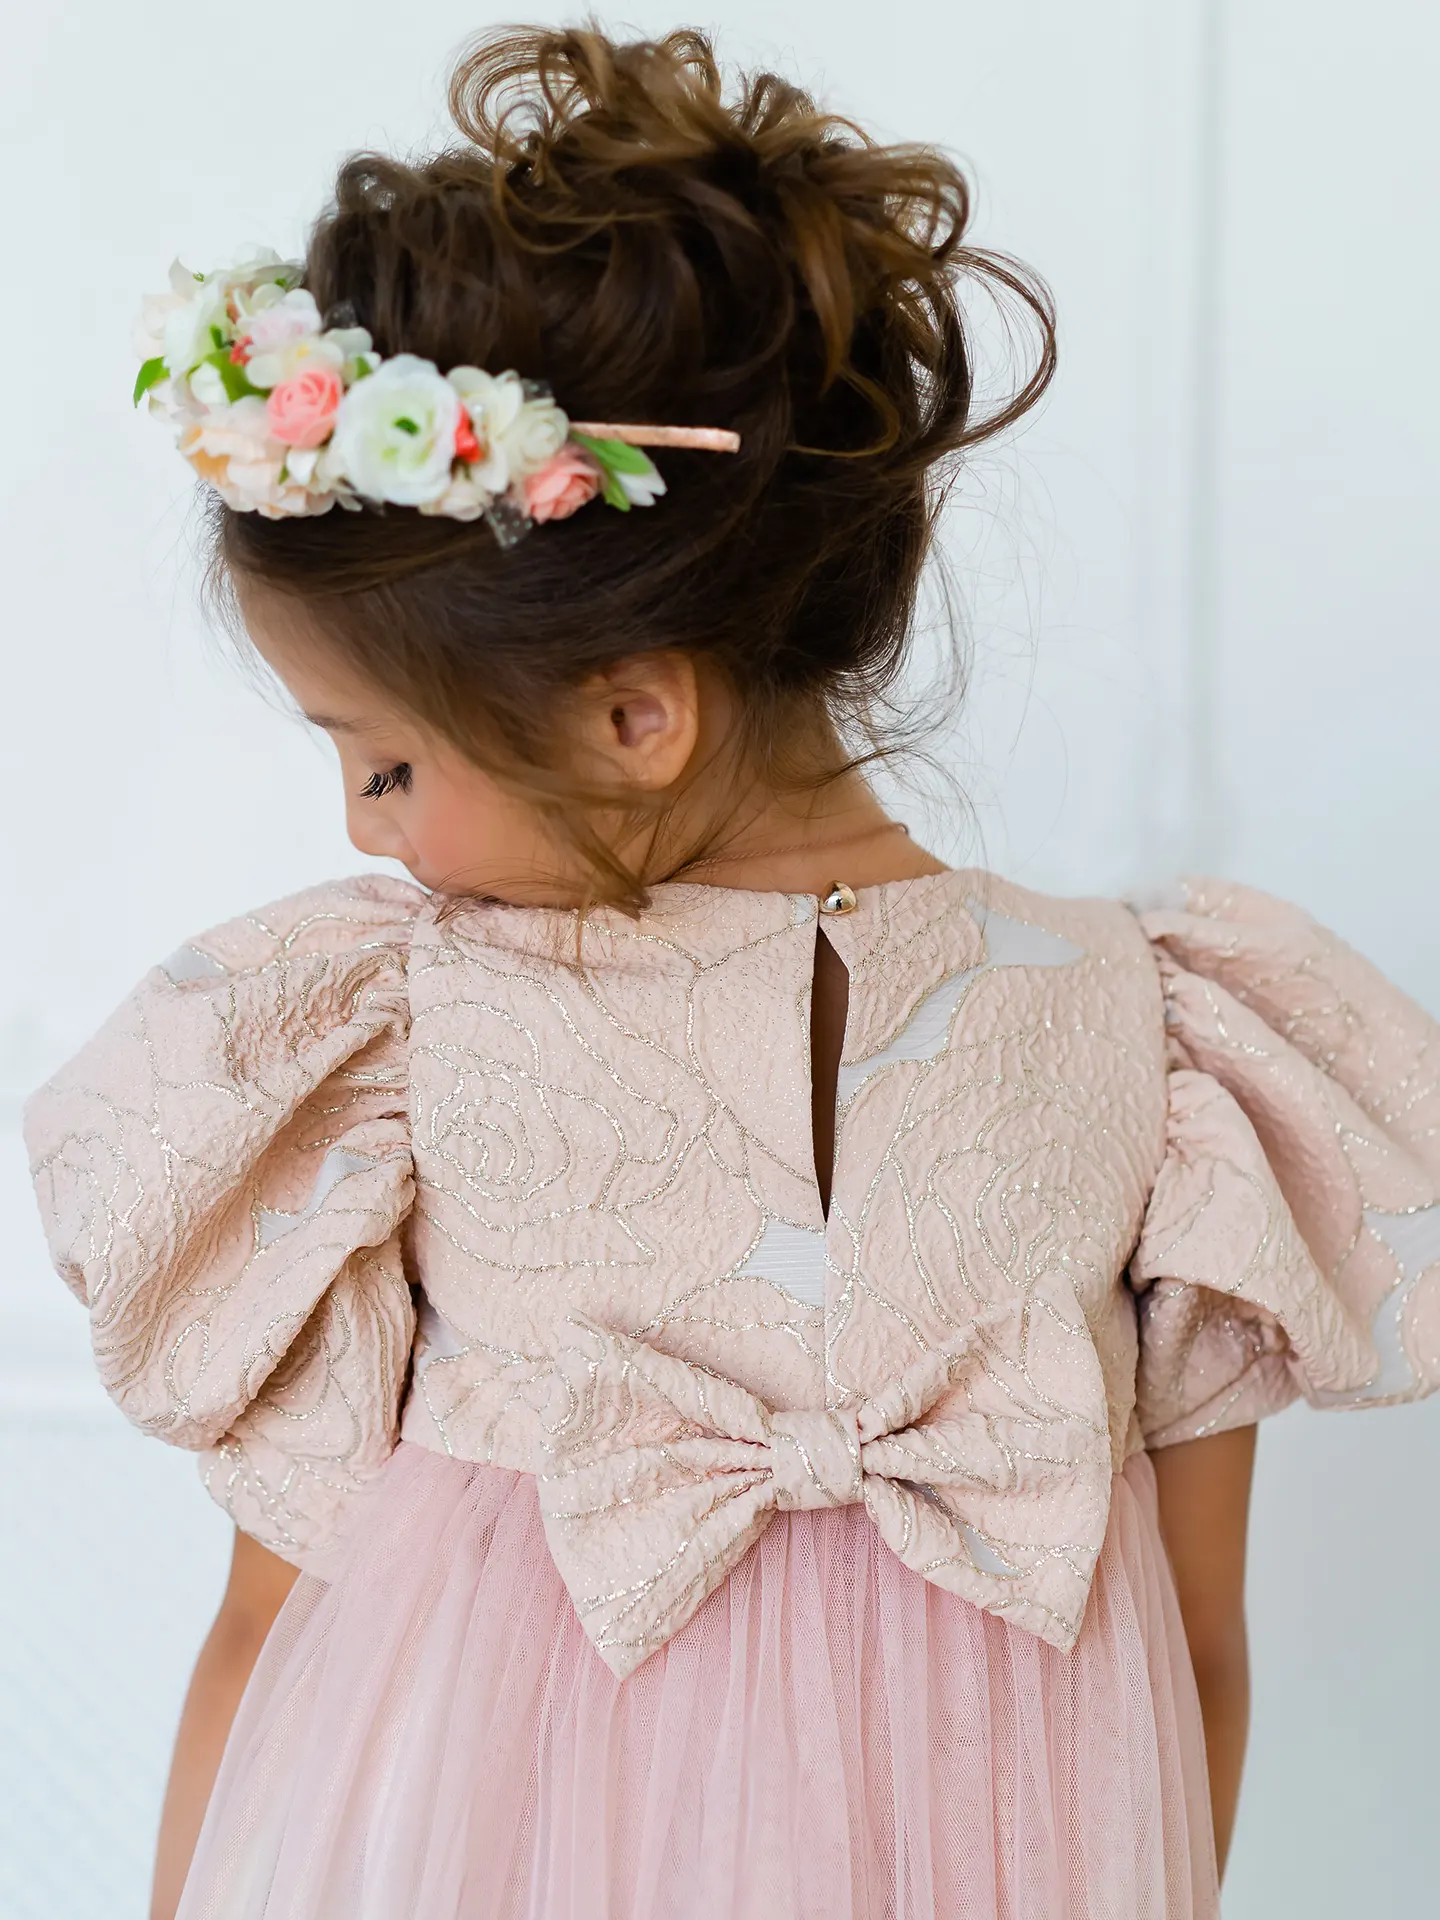 Soft High-quality, Comfortable girl's dress with a big bow Charm